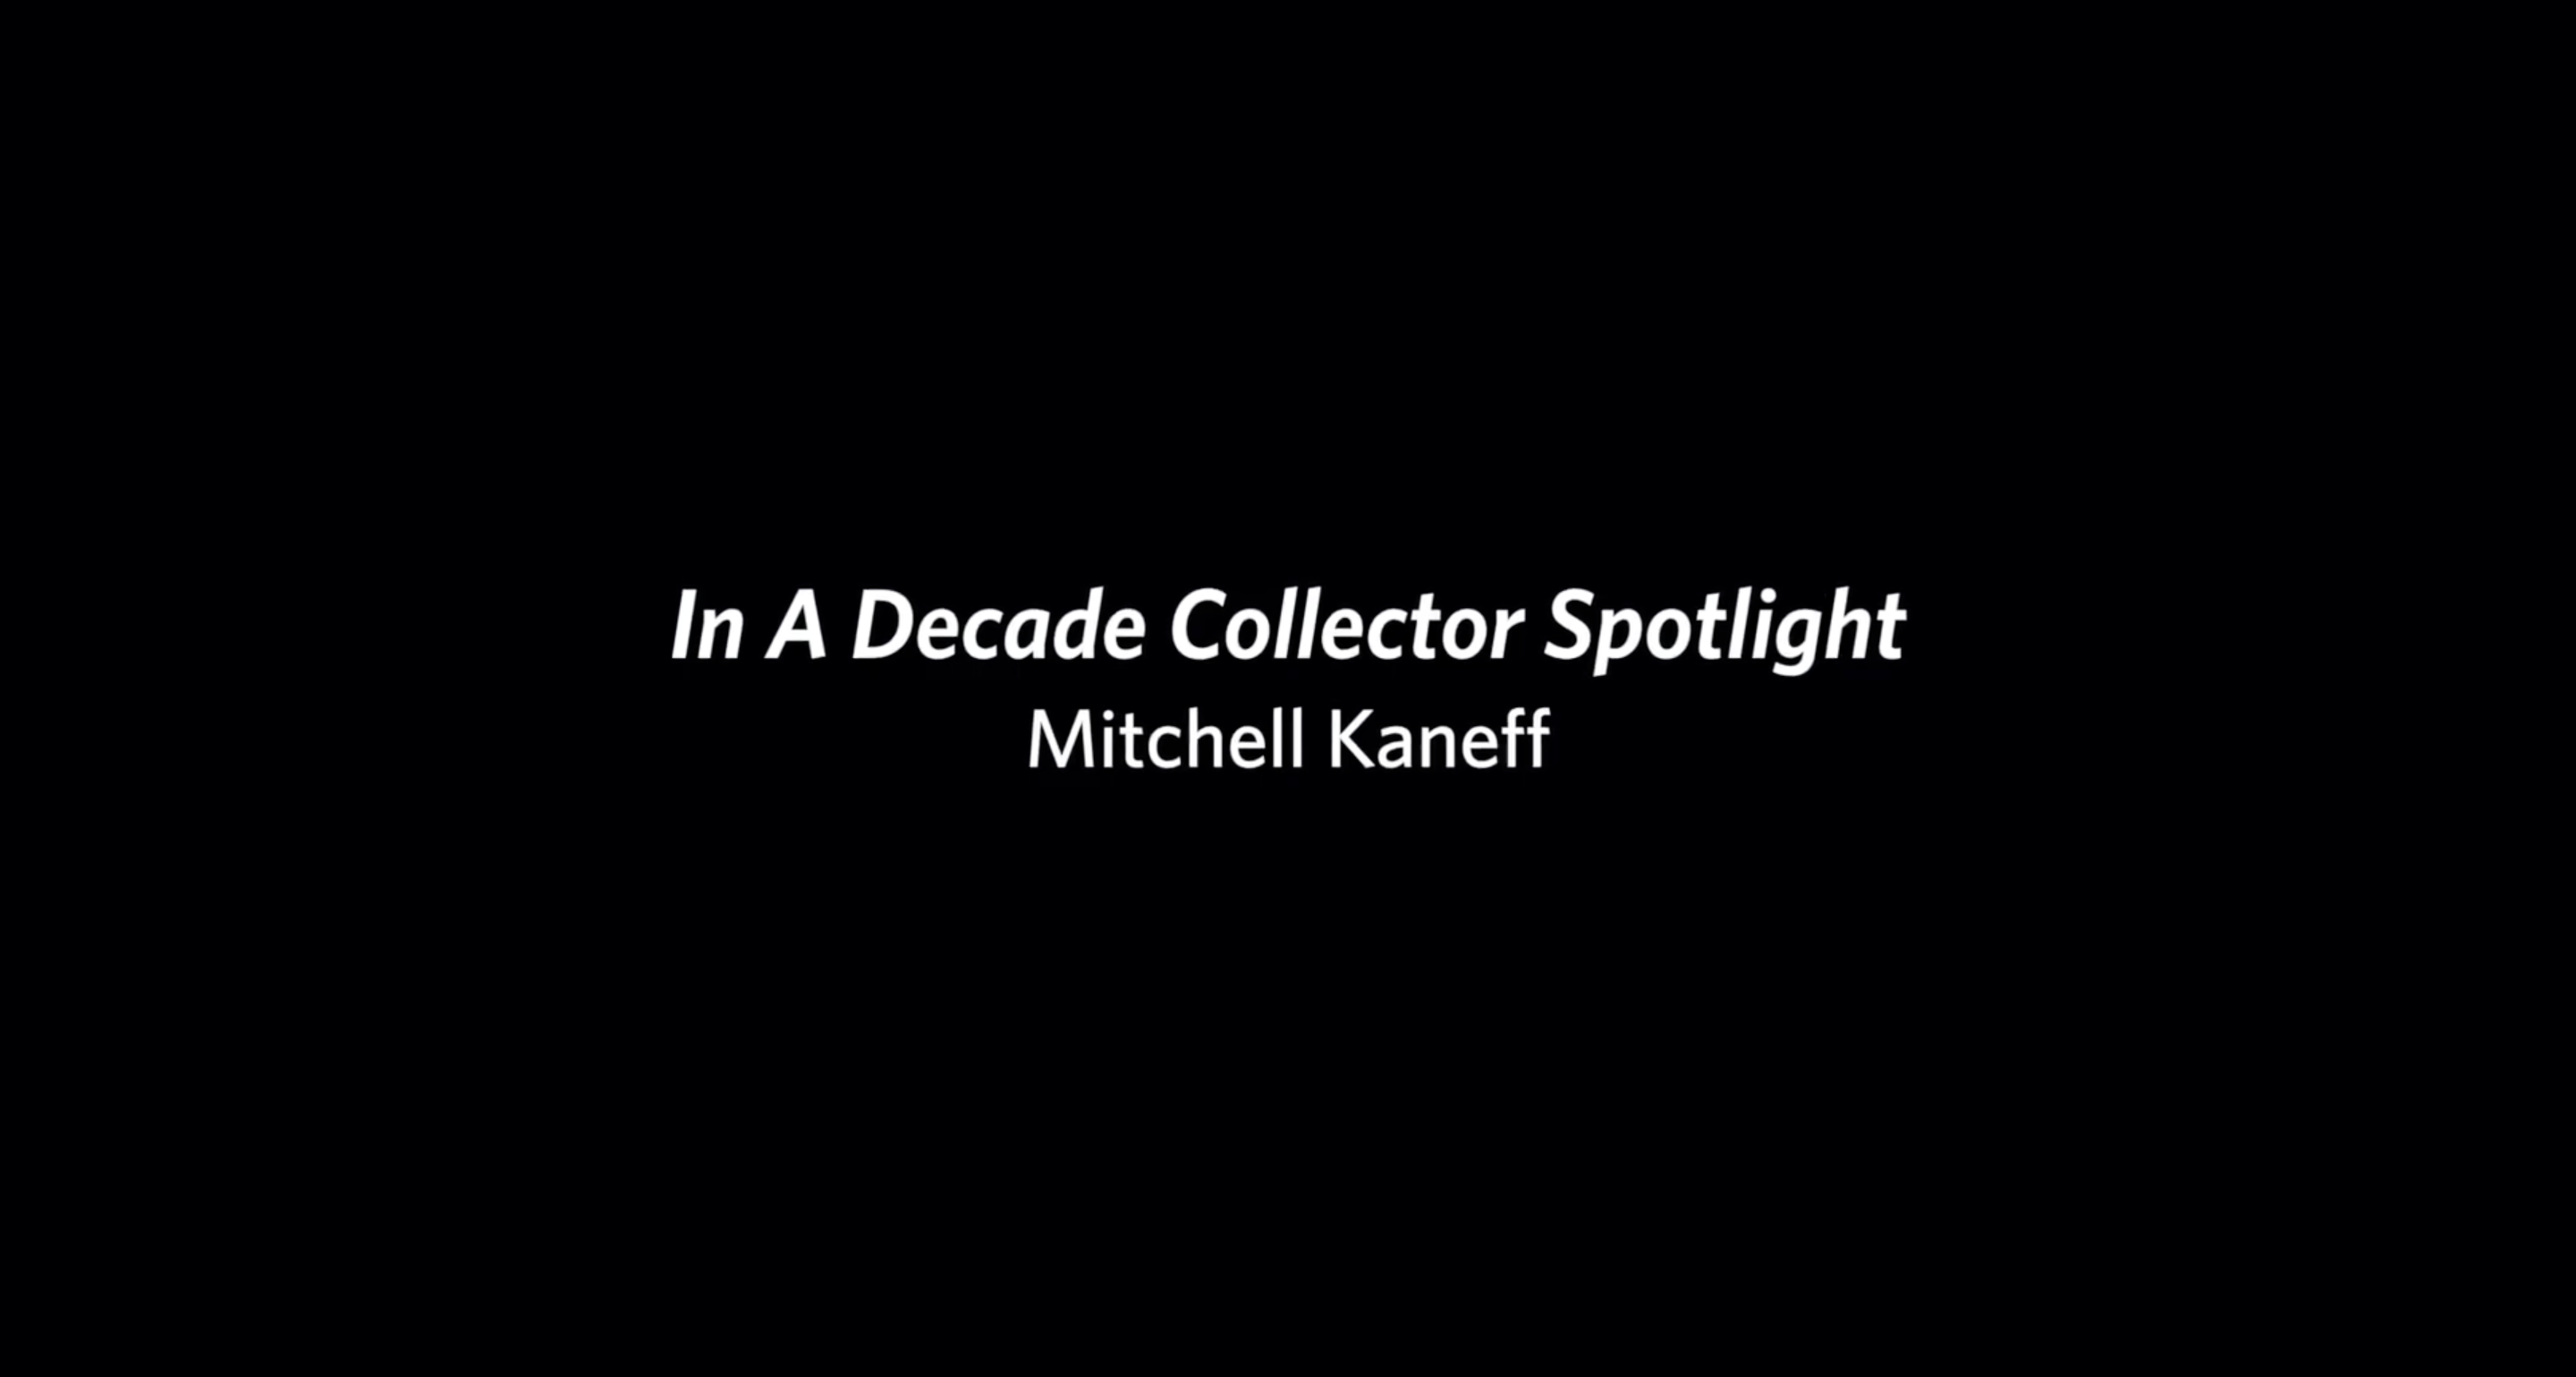 In a Decade Collector Spotlight: Mitchell Kaneff